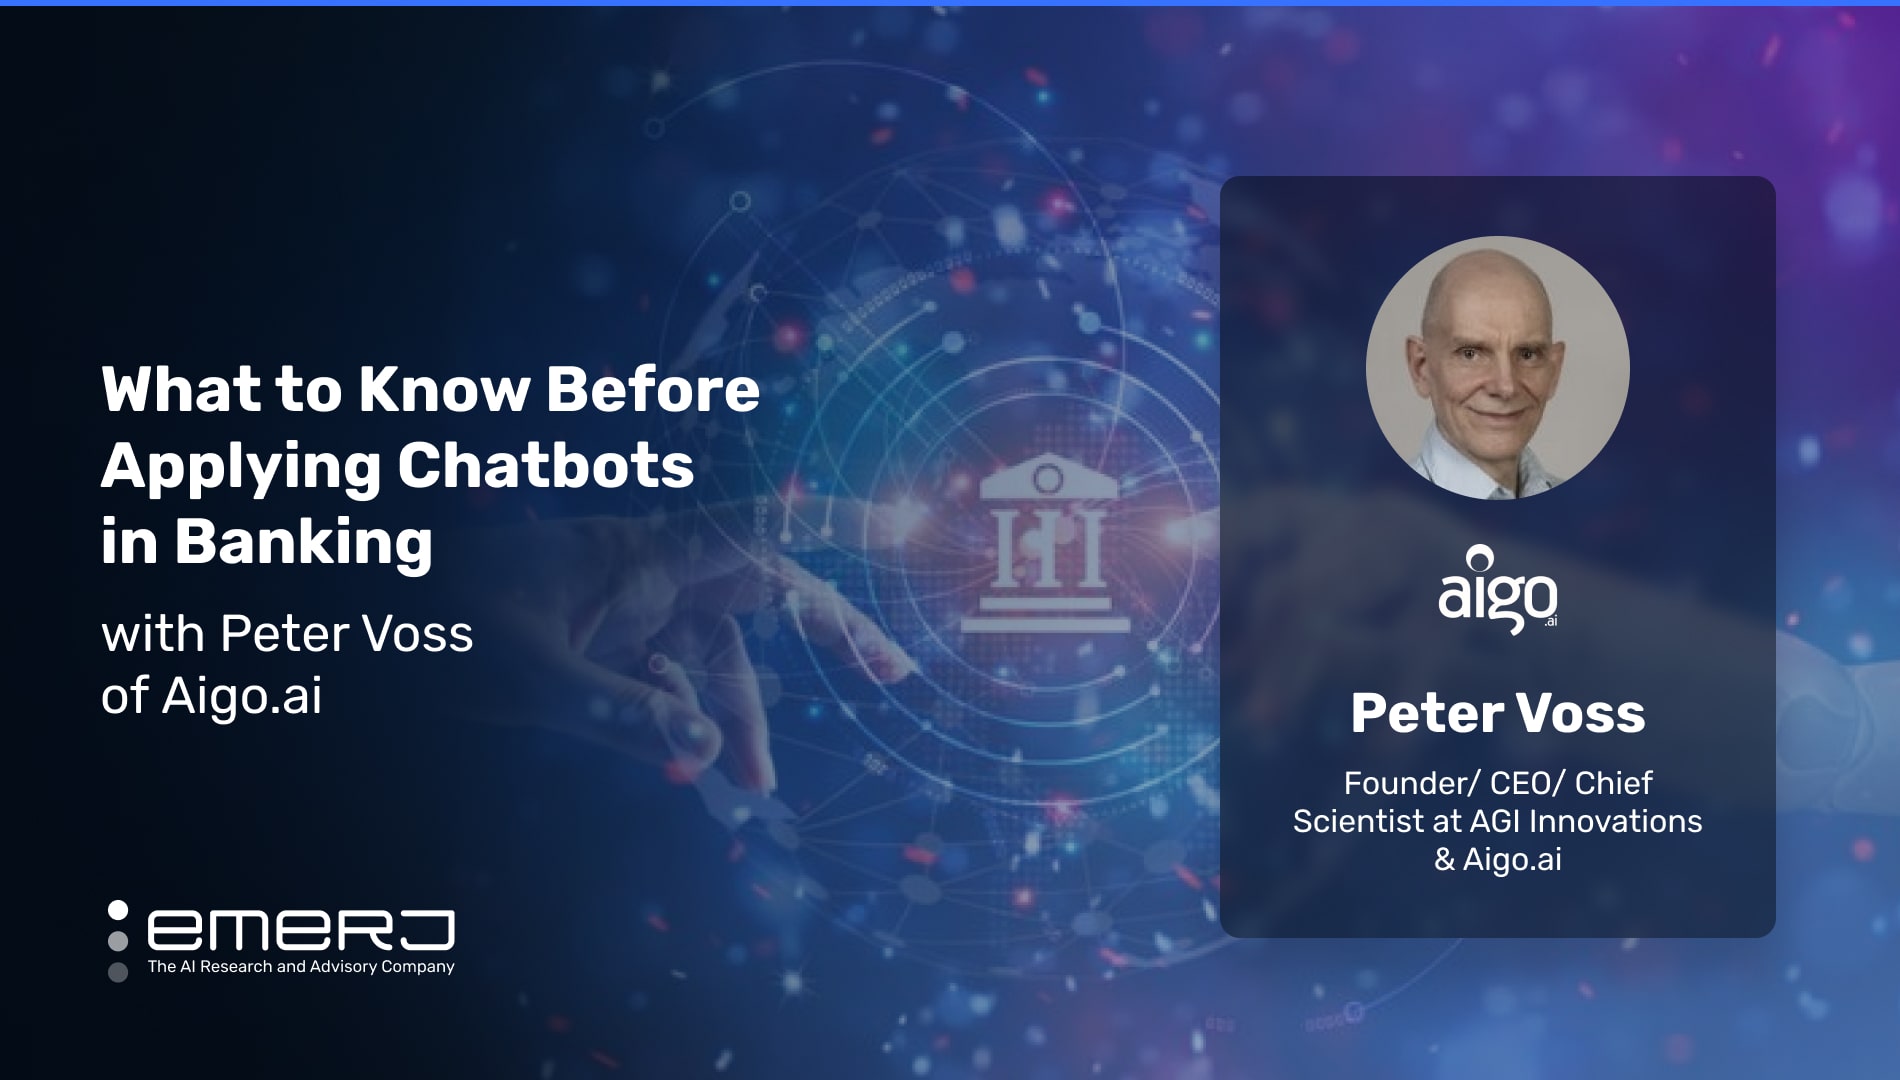 What to Know Before Applying Chatbots in Banking — With Peter Voss of Aigo.ai